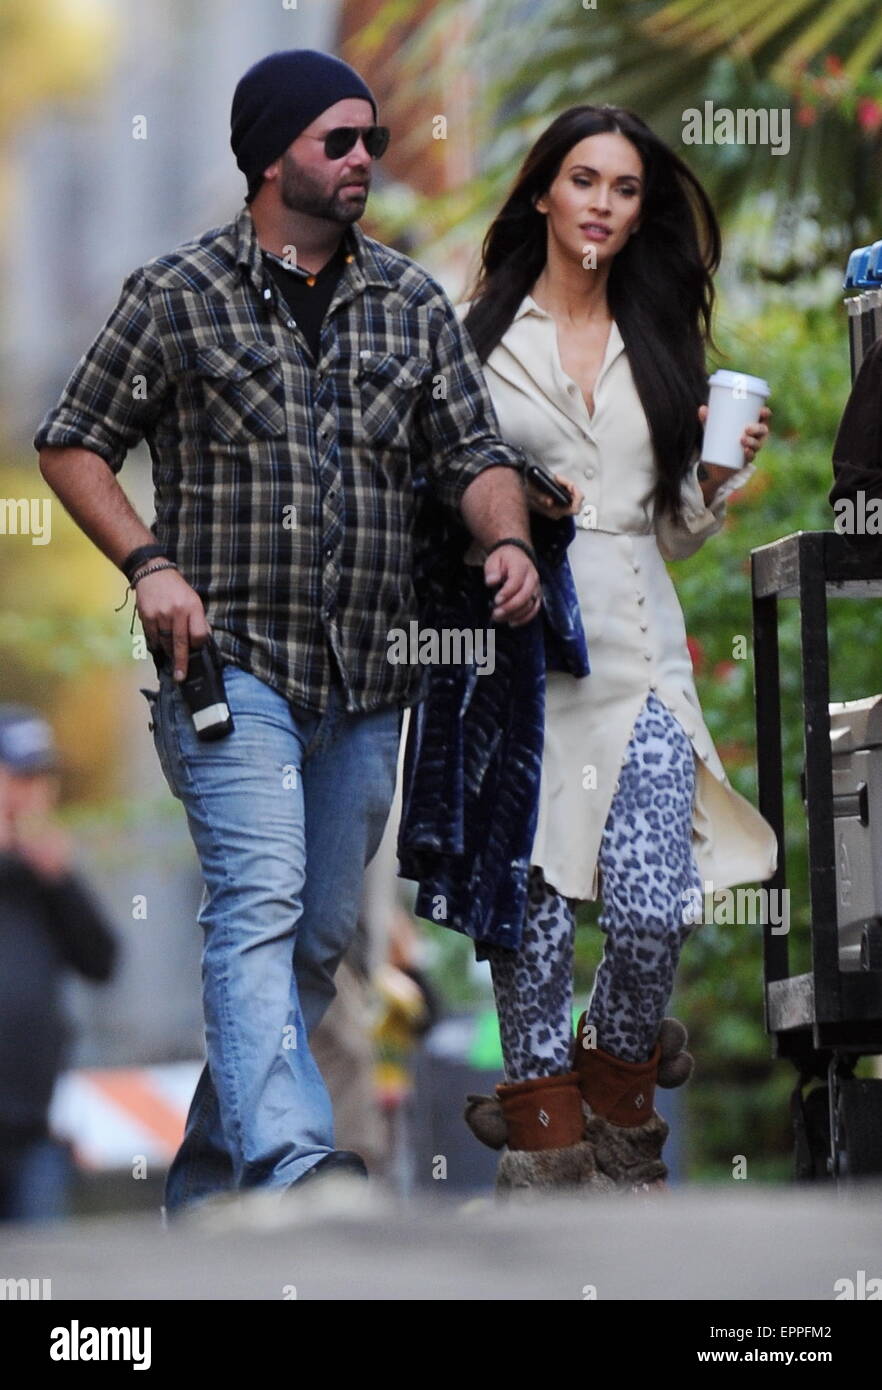 Actress Megan Fox arriving on the set of 'Zeroville' filming in Los Angeles Ca.  Featuring: Megan Fox Where: Los Angeles, California, United States When: 15 Nov 2014 Credit: Cousart/JFXimages/WENN.com Stock Photo